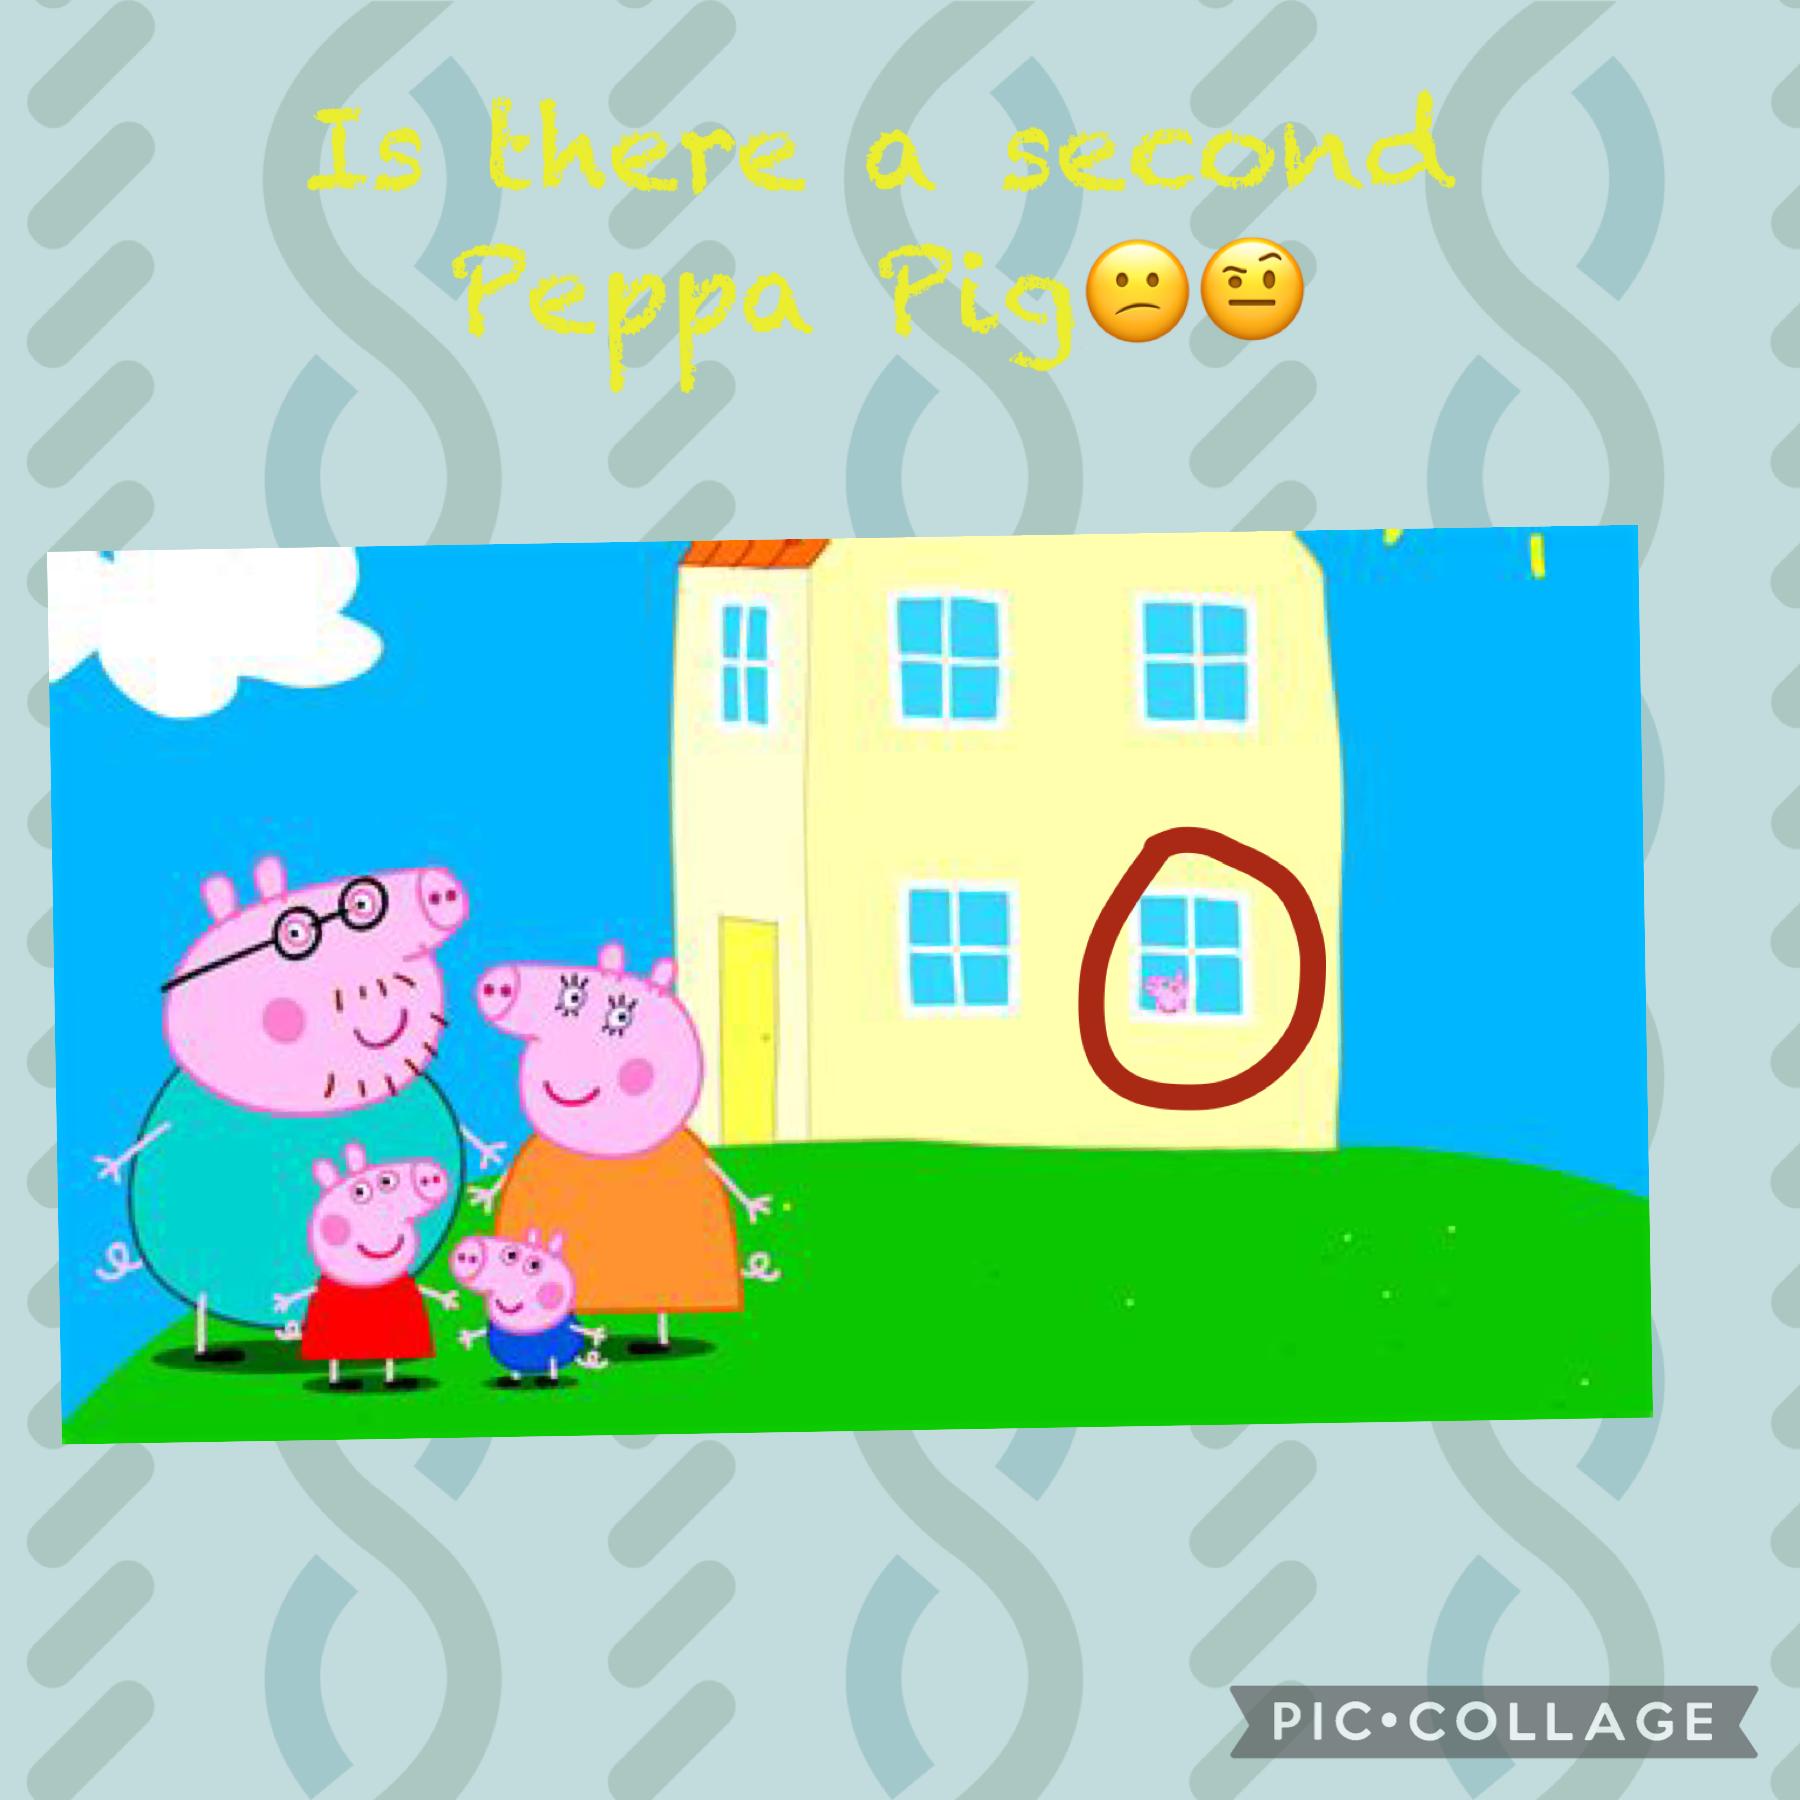 Watch the video on YouTube of the scary truth of Peppa Pig